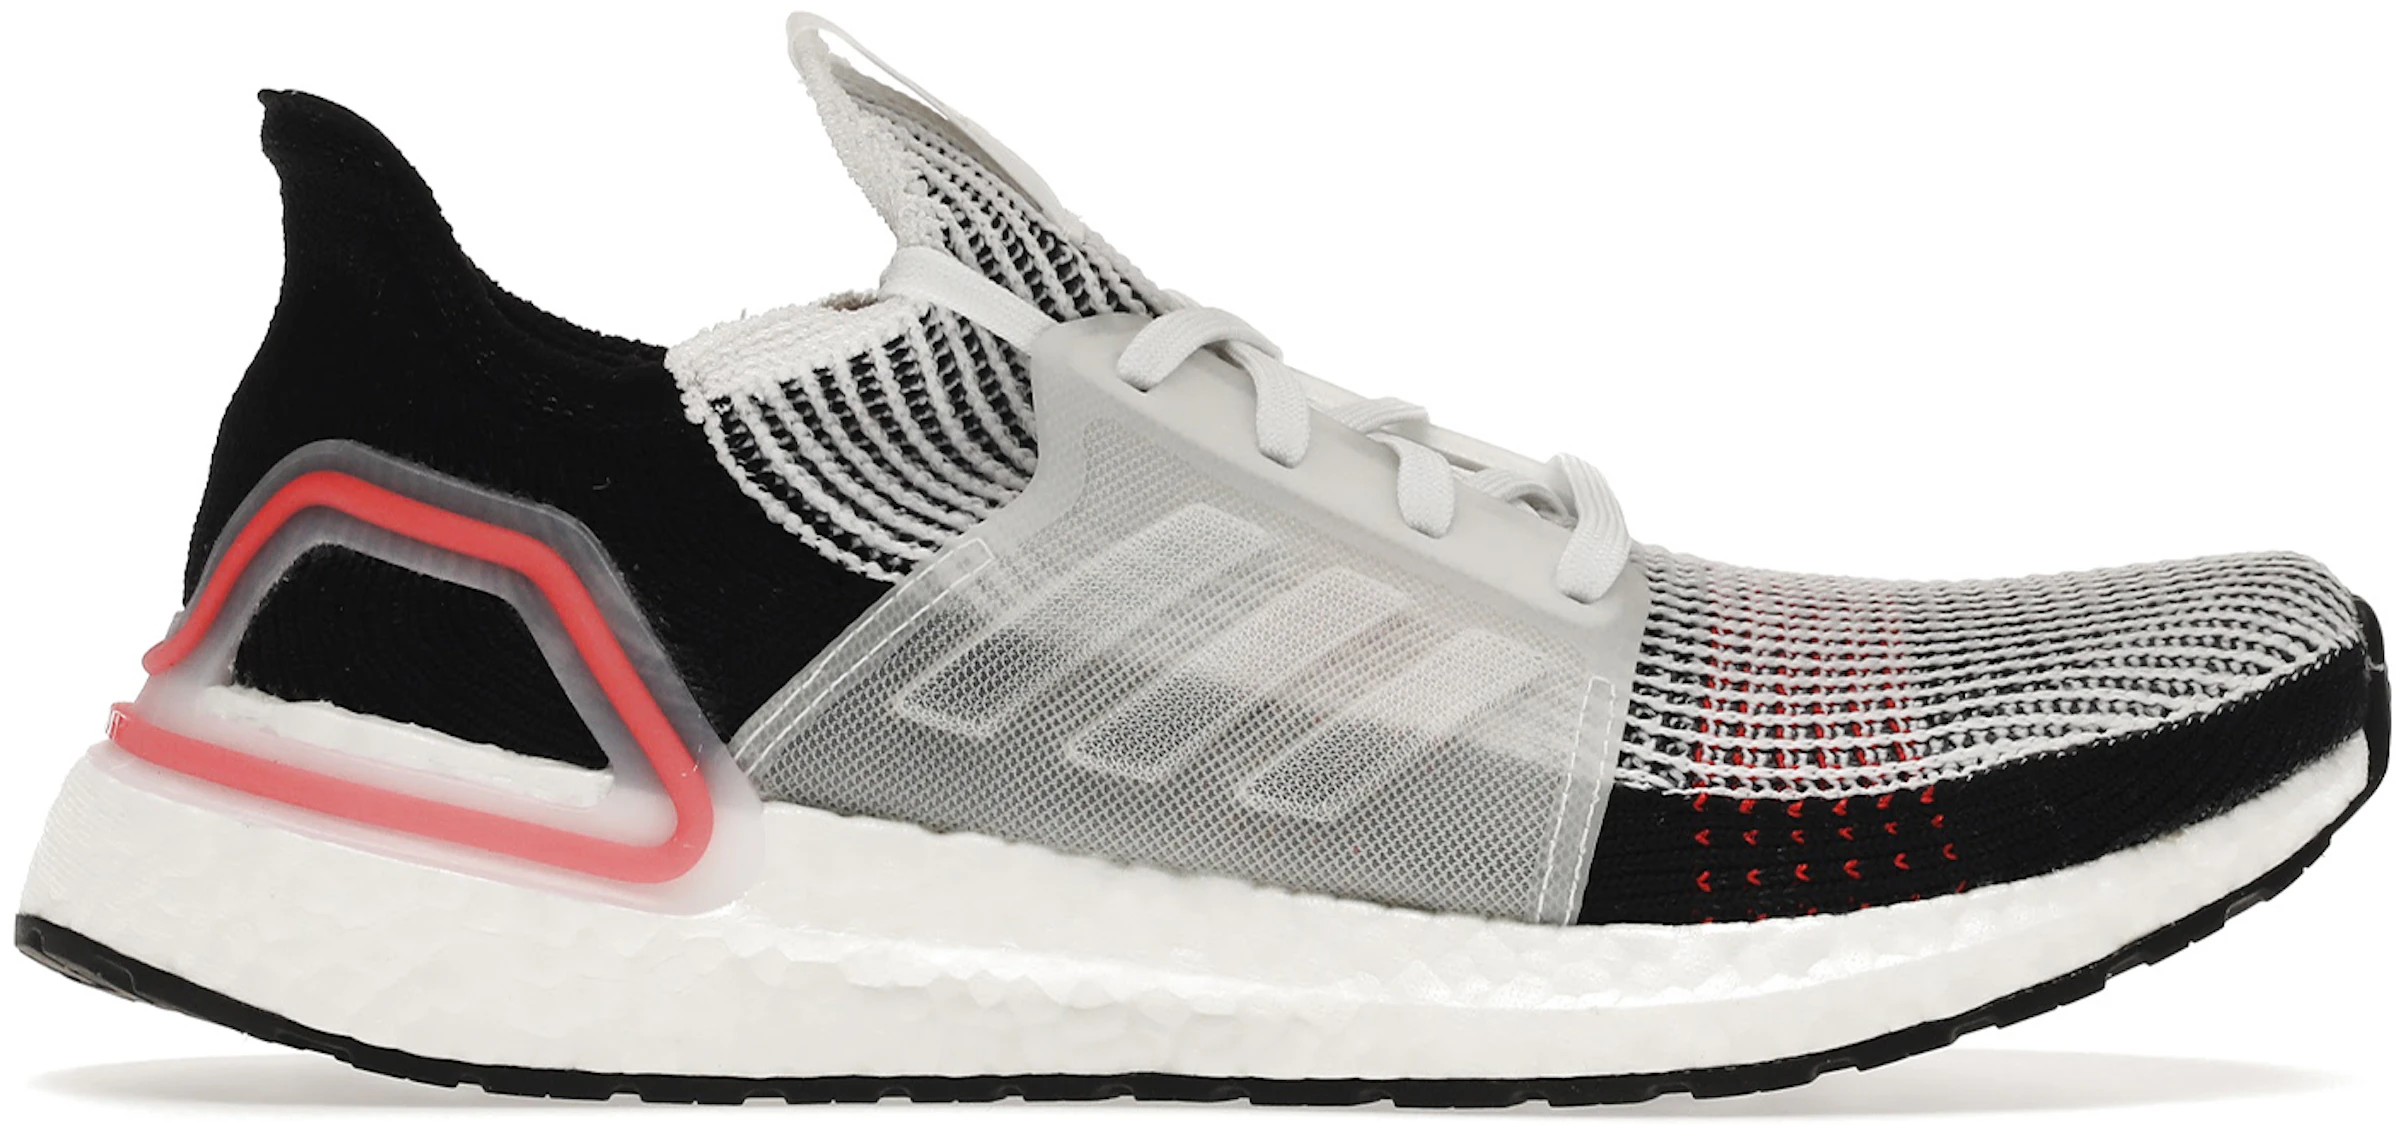 adidas Ultra Boost 2019 Cloud White Active Red (Women's) F35282 - US